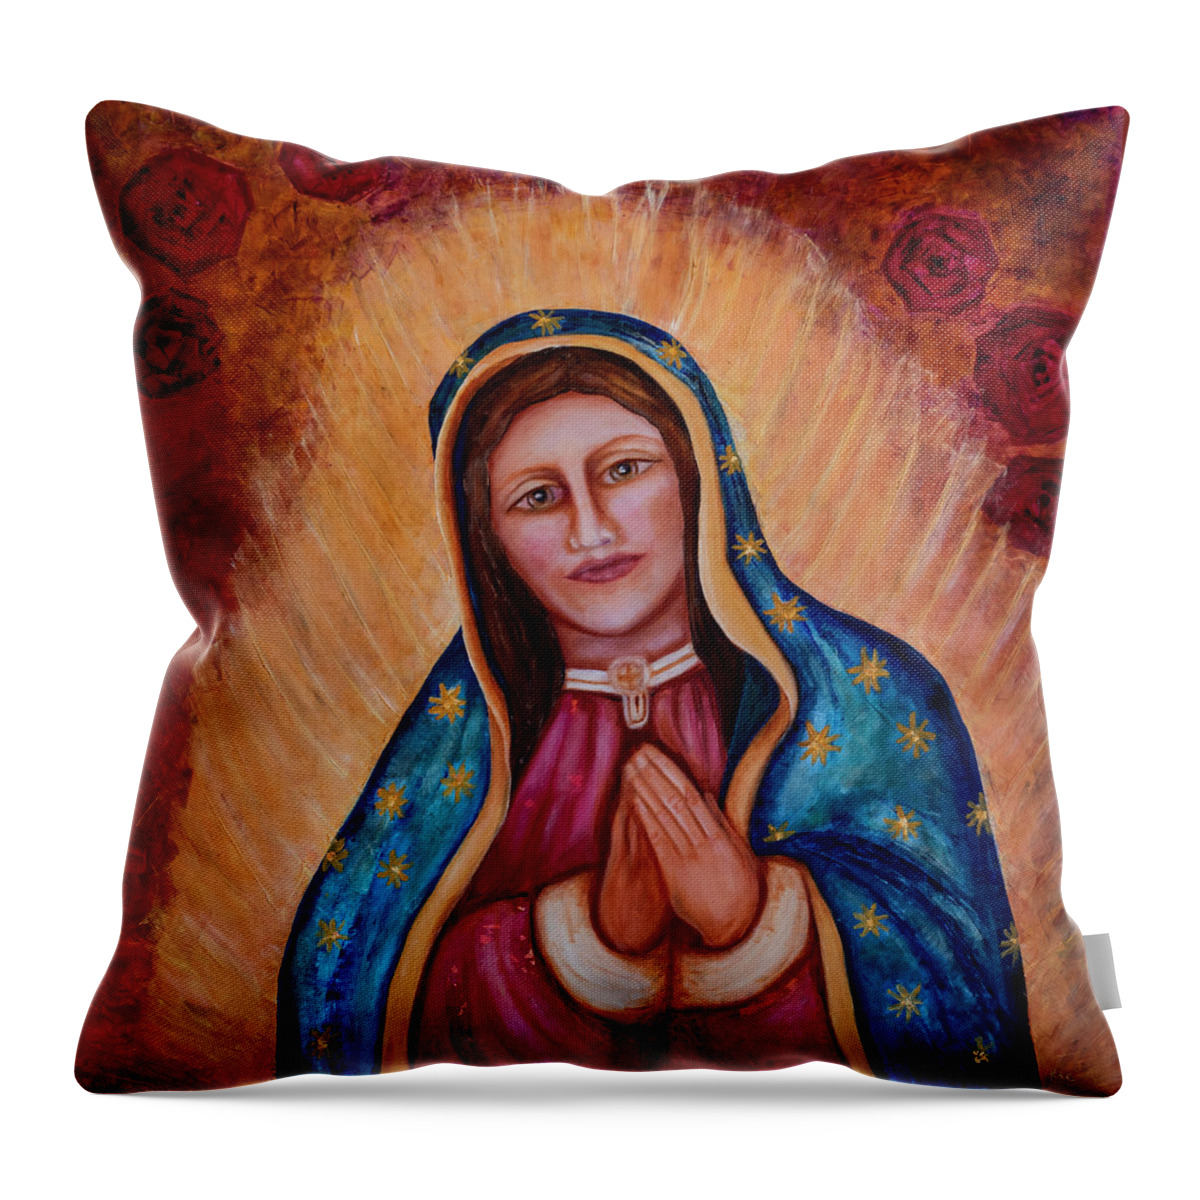 Female Saint Throw Pillow featuring the painting Our Lady of Quadalupe by Karen Conley